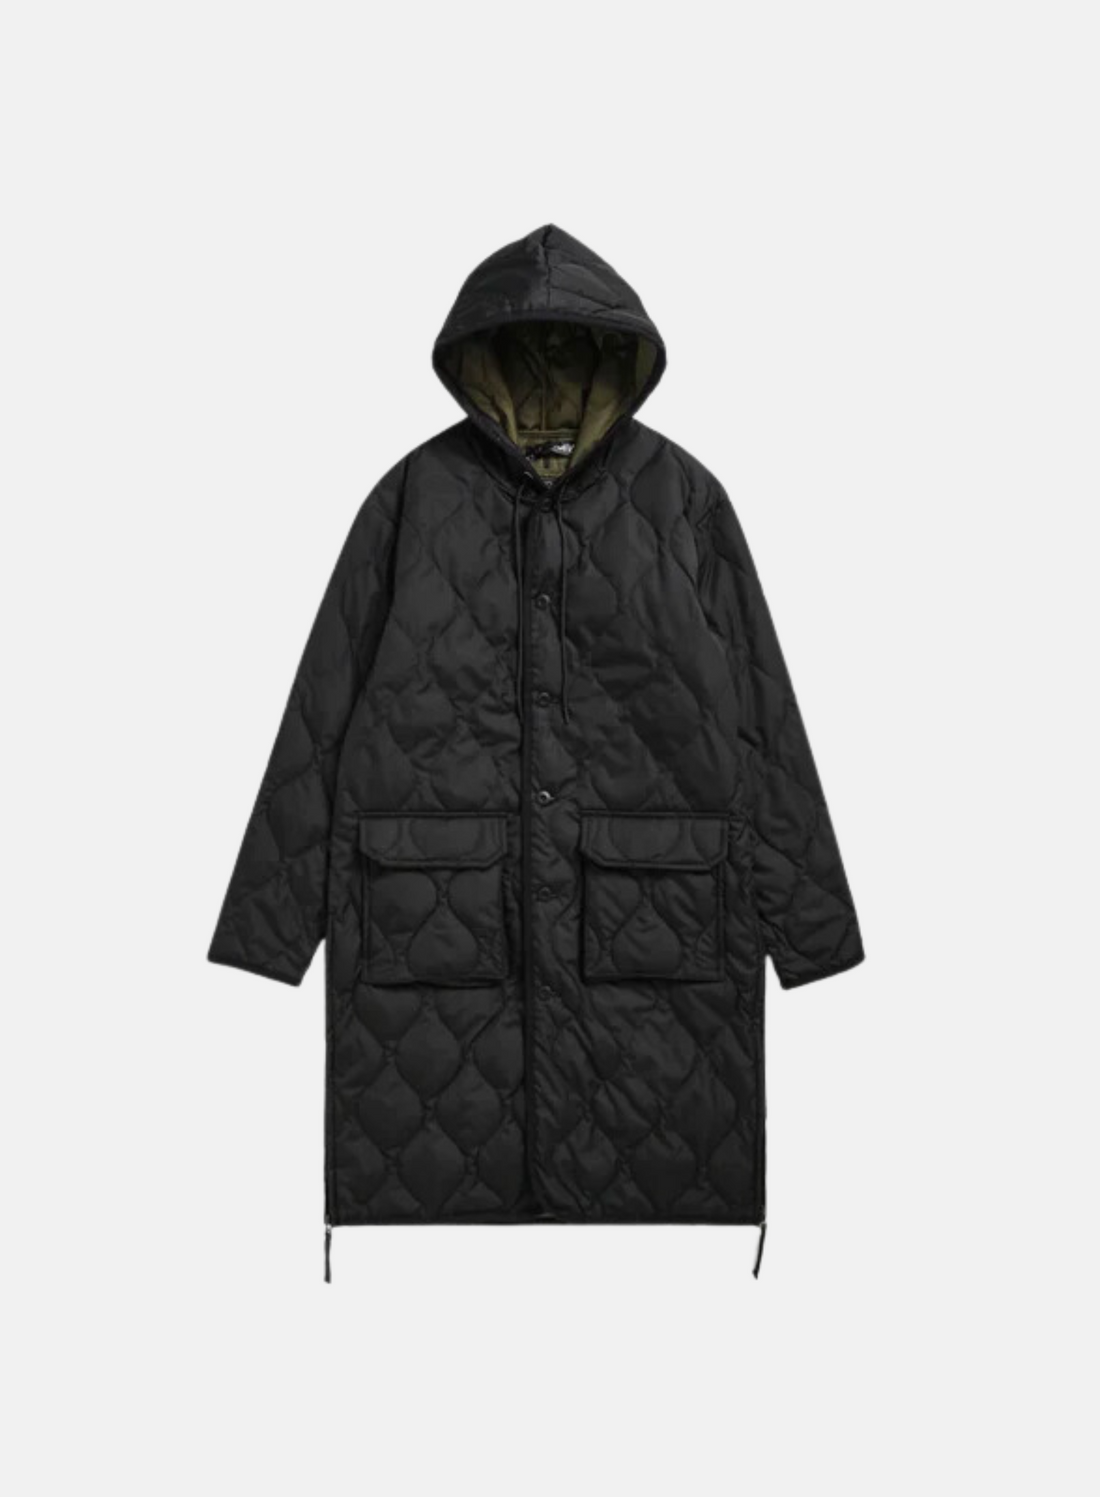 TAION MILITARY HOODIE DOWN COAT CHARCOAL - Hympala Store 